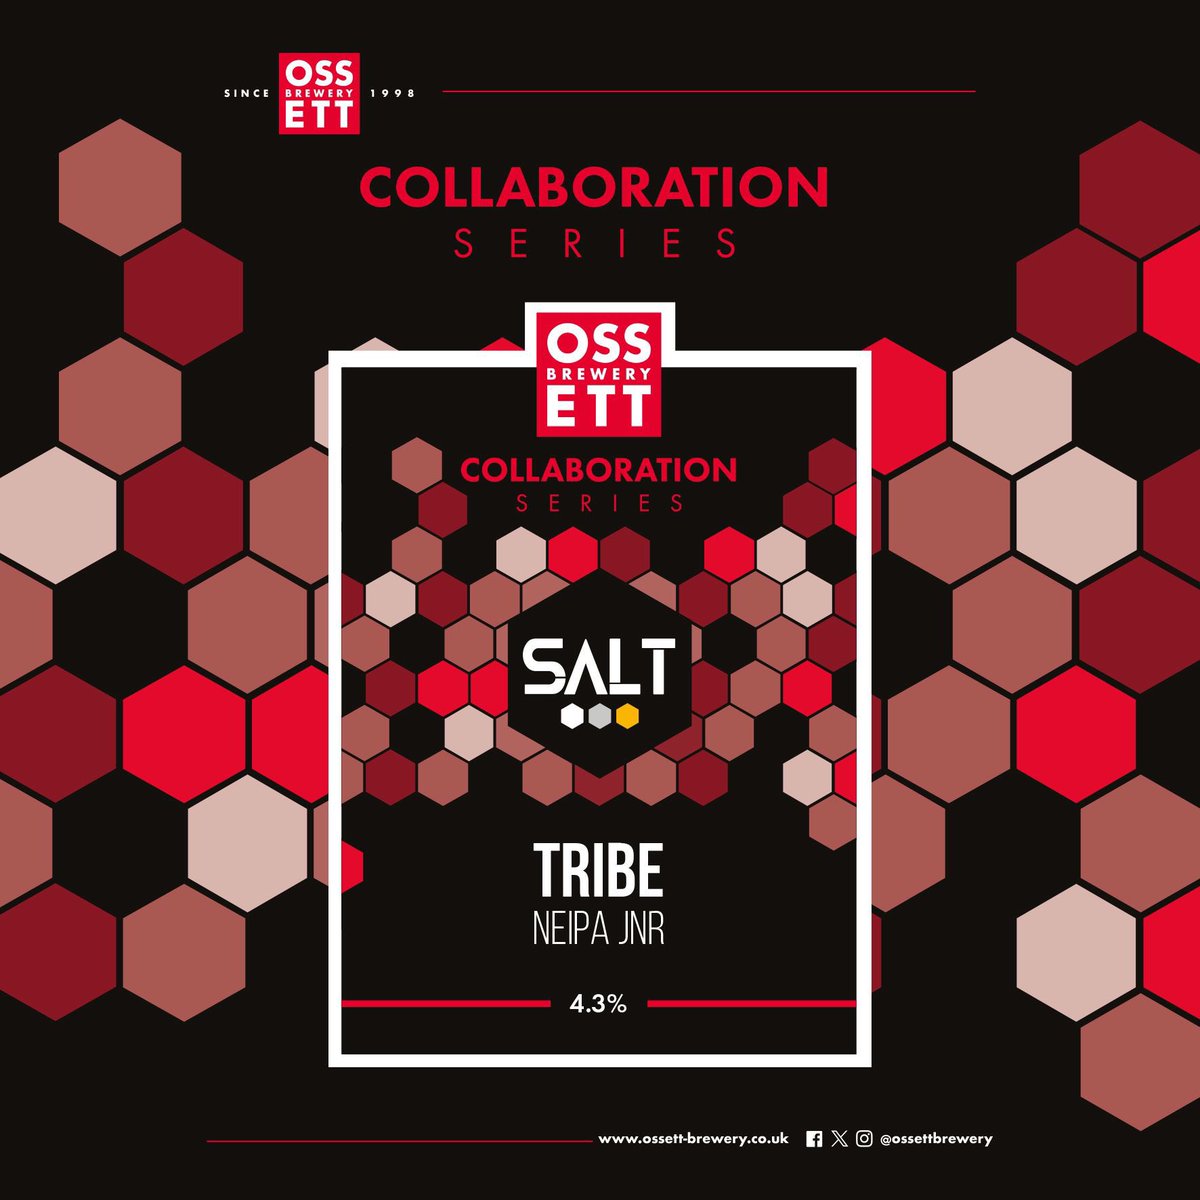 🤝 TRIBE 🤝 In collaboration with our sister brewery, SALT 🍻 A super hazy NEIPA-style cask ale. A grist of pale, oat and wheat malts results in a straw-coloured beer that is served hazy and vegan friendly. Order for your pub ⤵️ 📞 01924 261333 📧 sales@ossett-brewery.co.uk